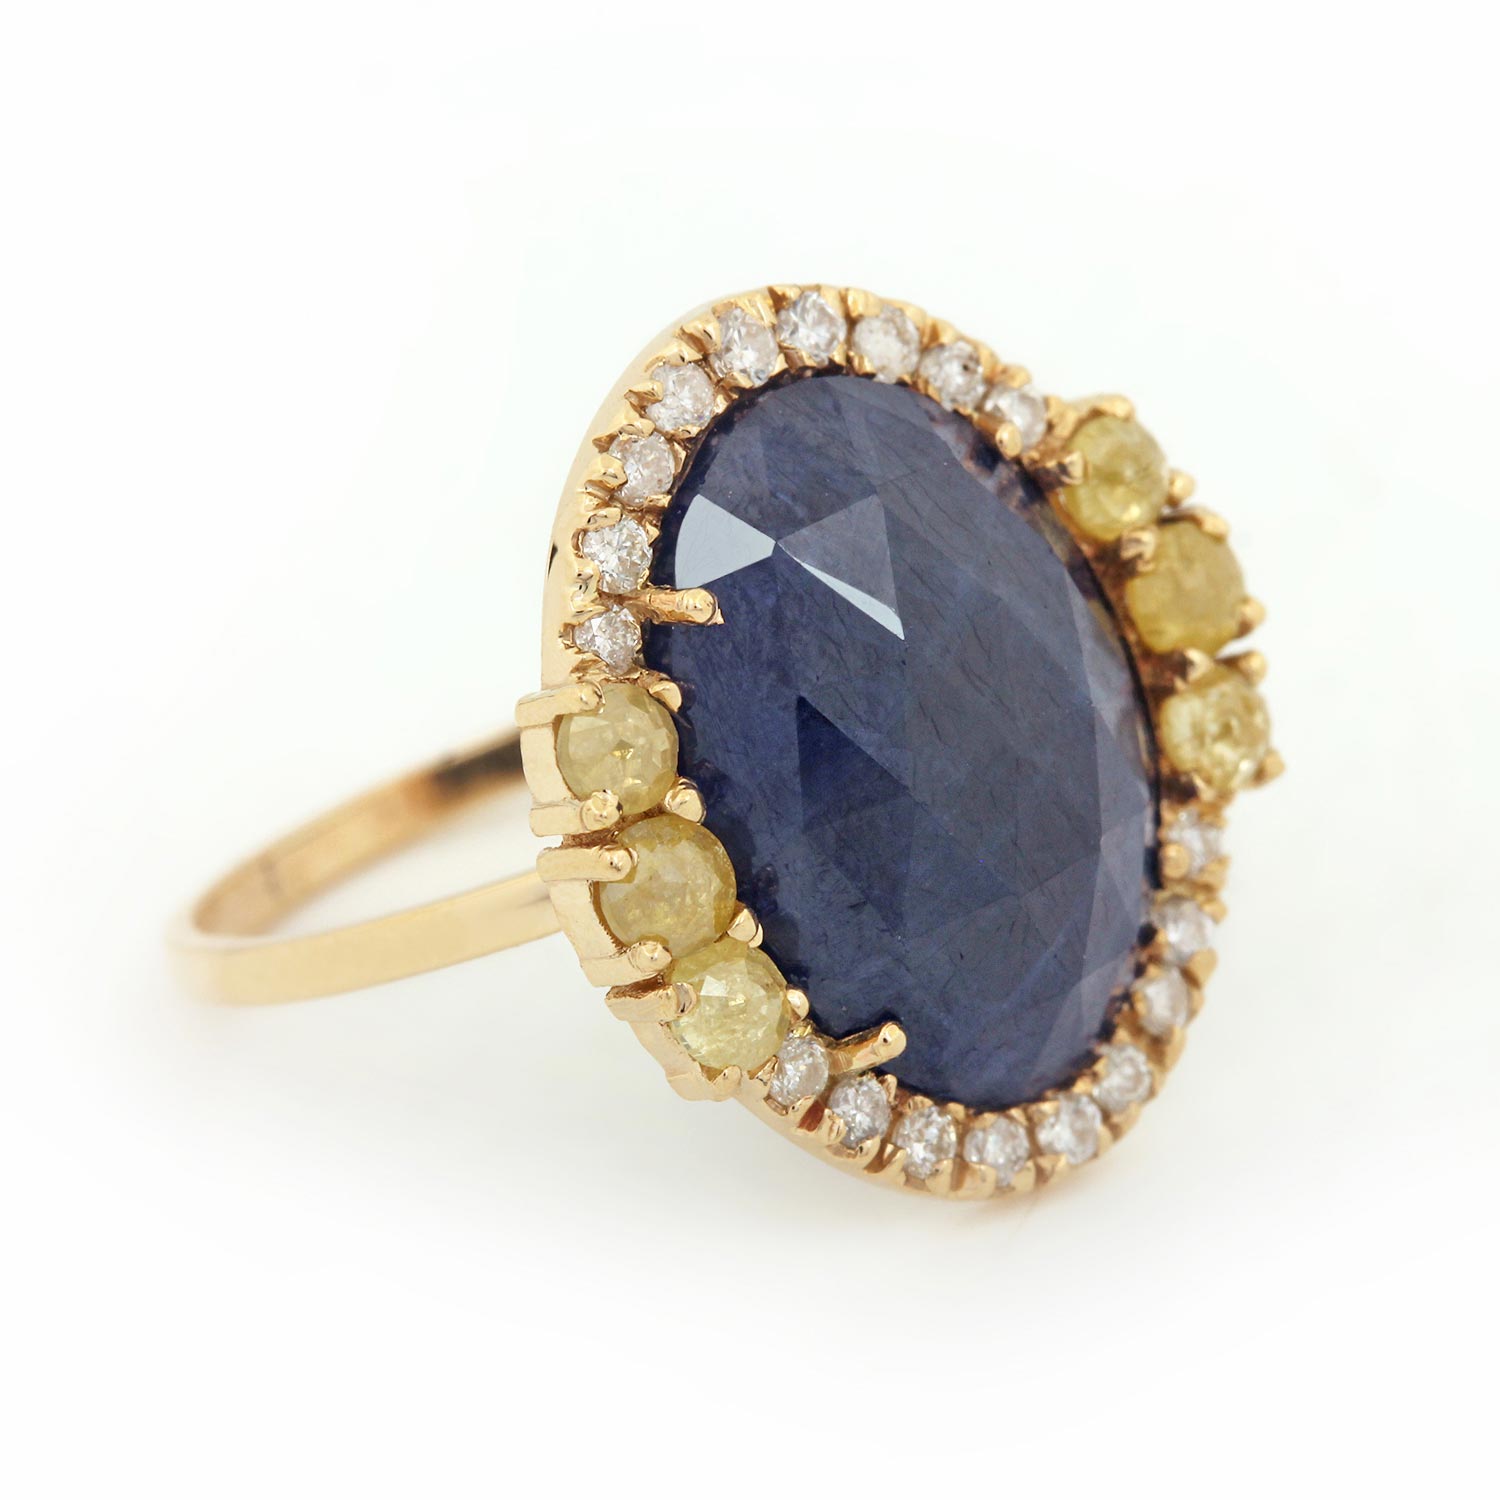 Blue Sapphire 14K Solid Gold Cocktail Ring Pave Diamond Jewelry